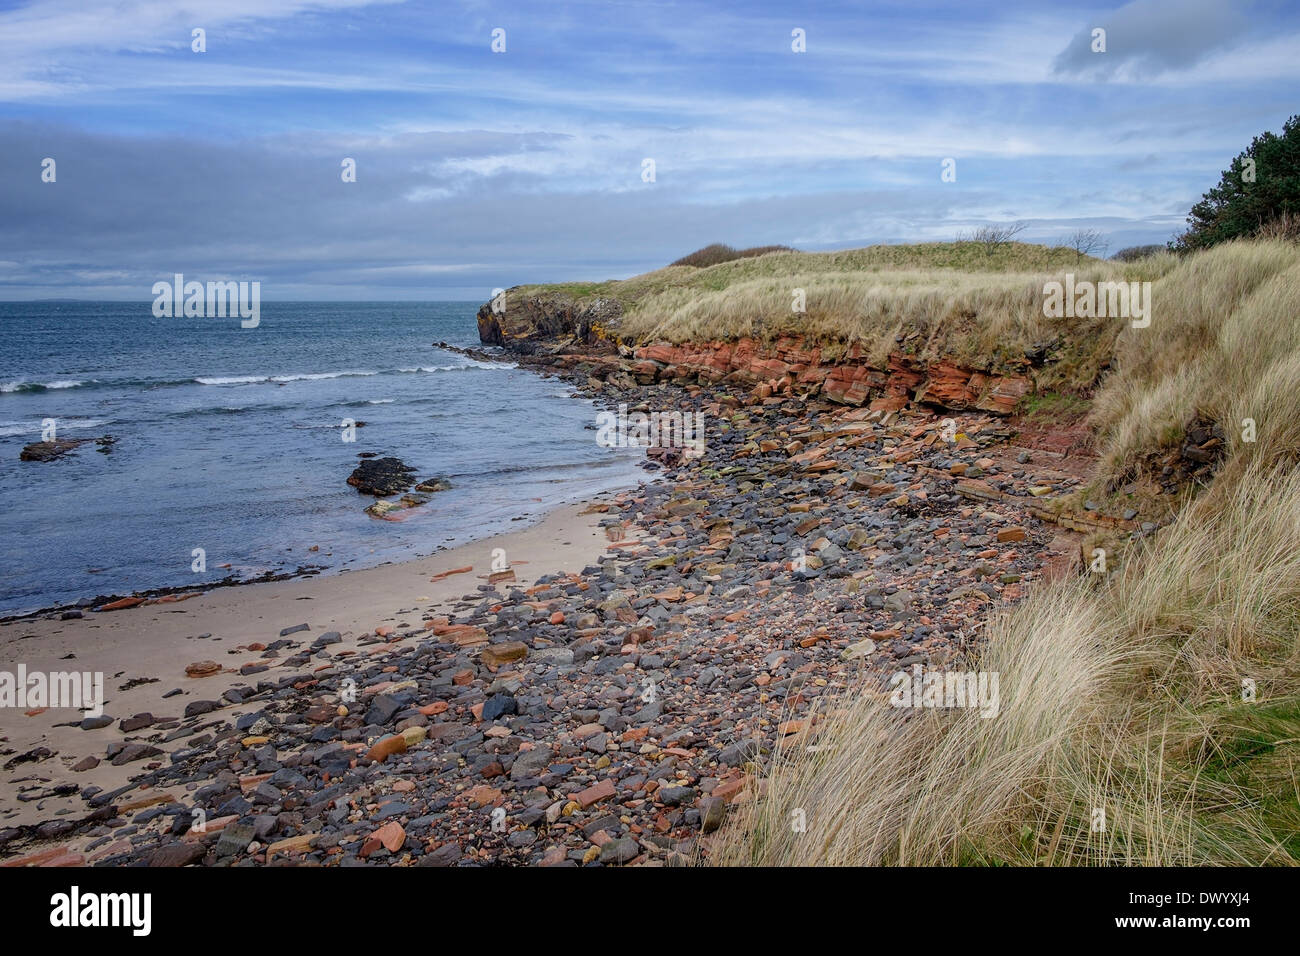 Eroded sandstone cliffs at Tyninghame, East Lothian, Scotland. Sometimes known as Ravensheugh or Peffersands beach. Stock Photo